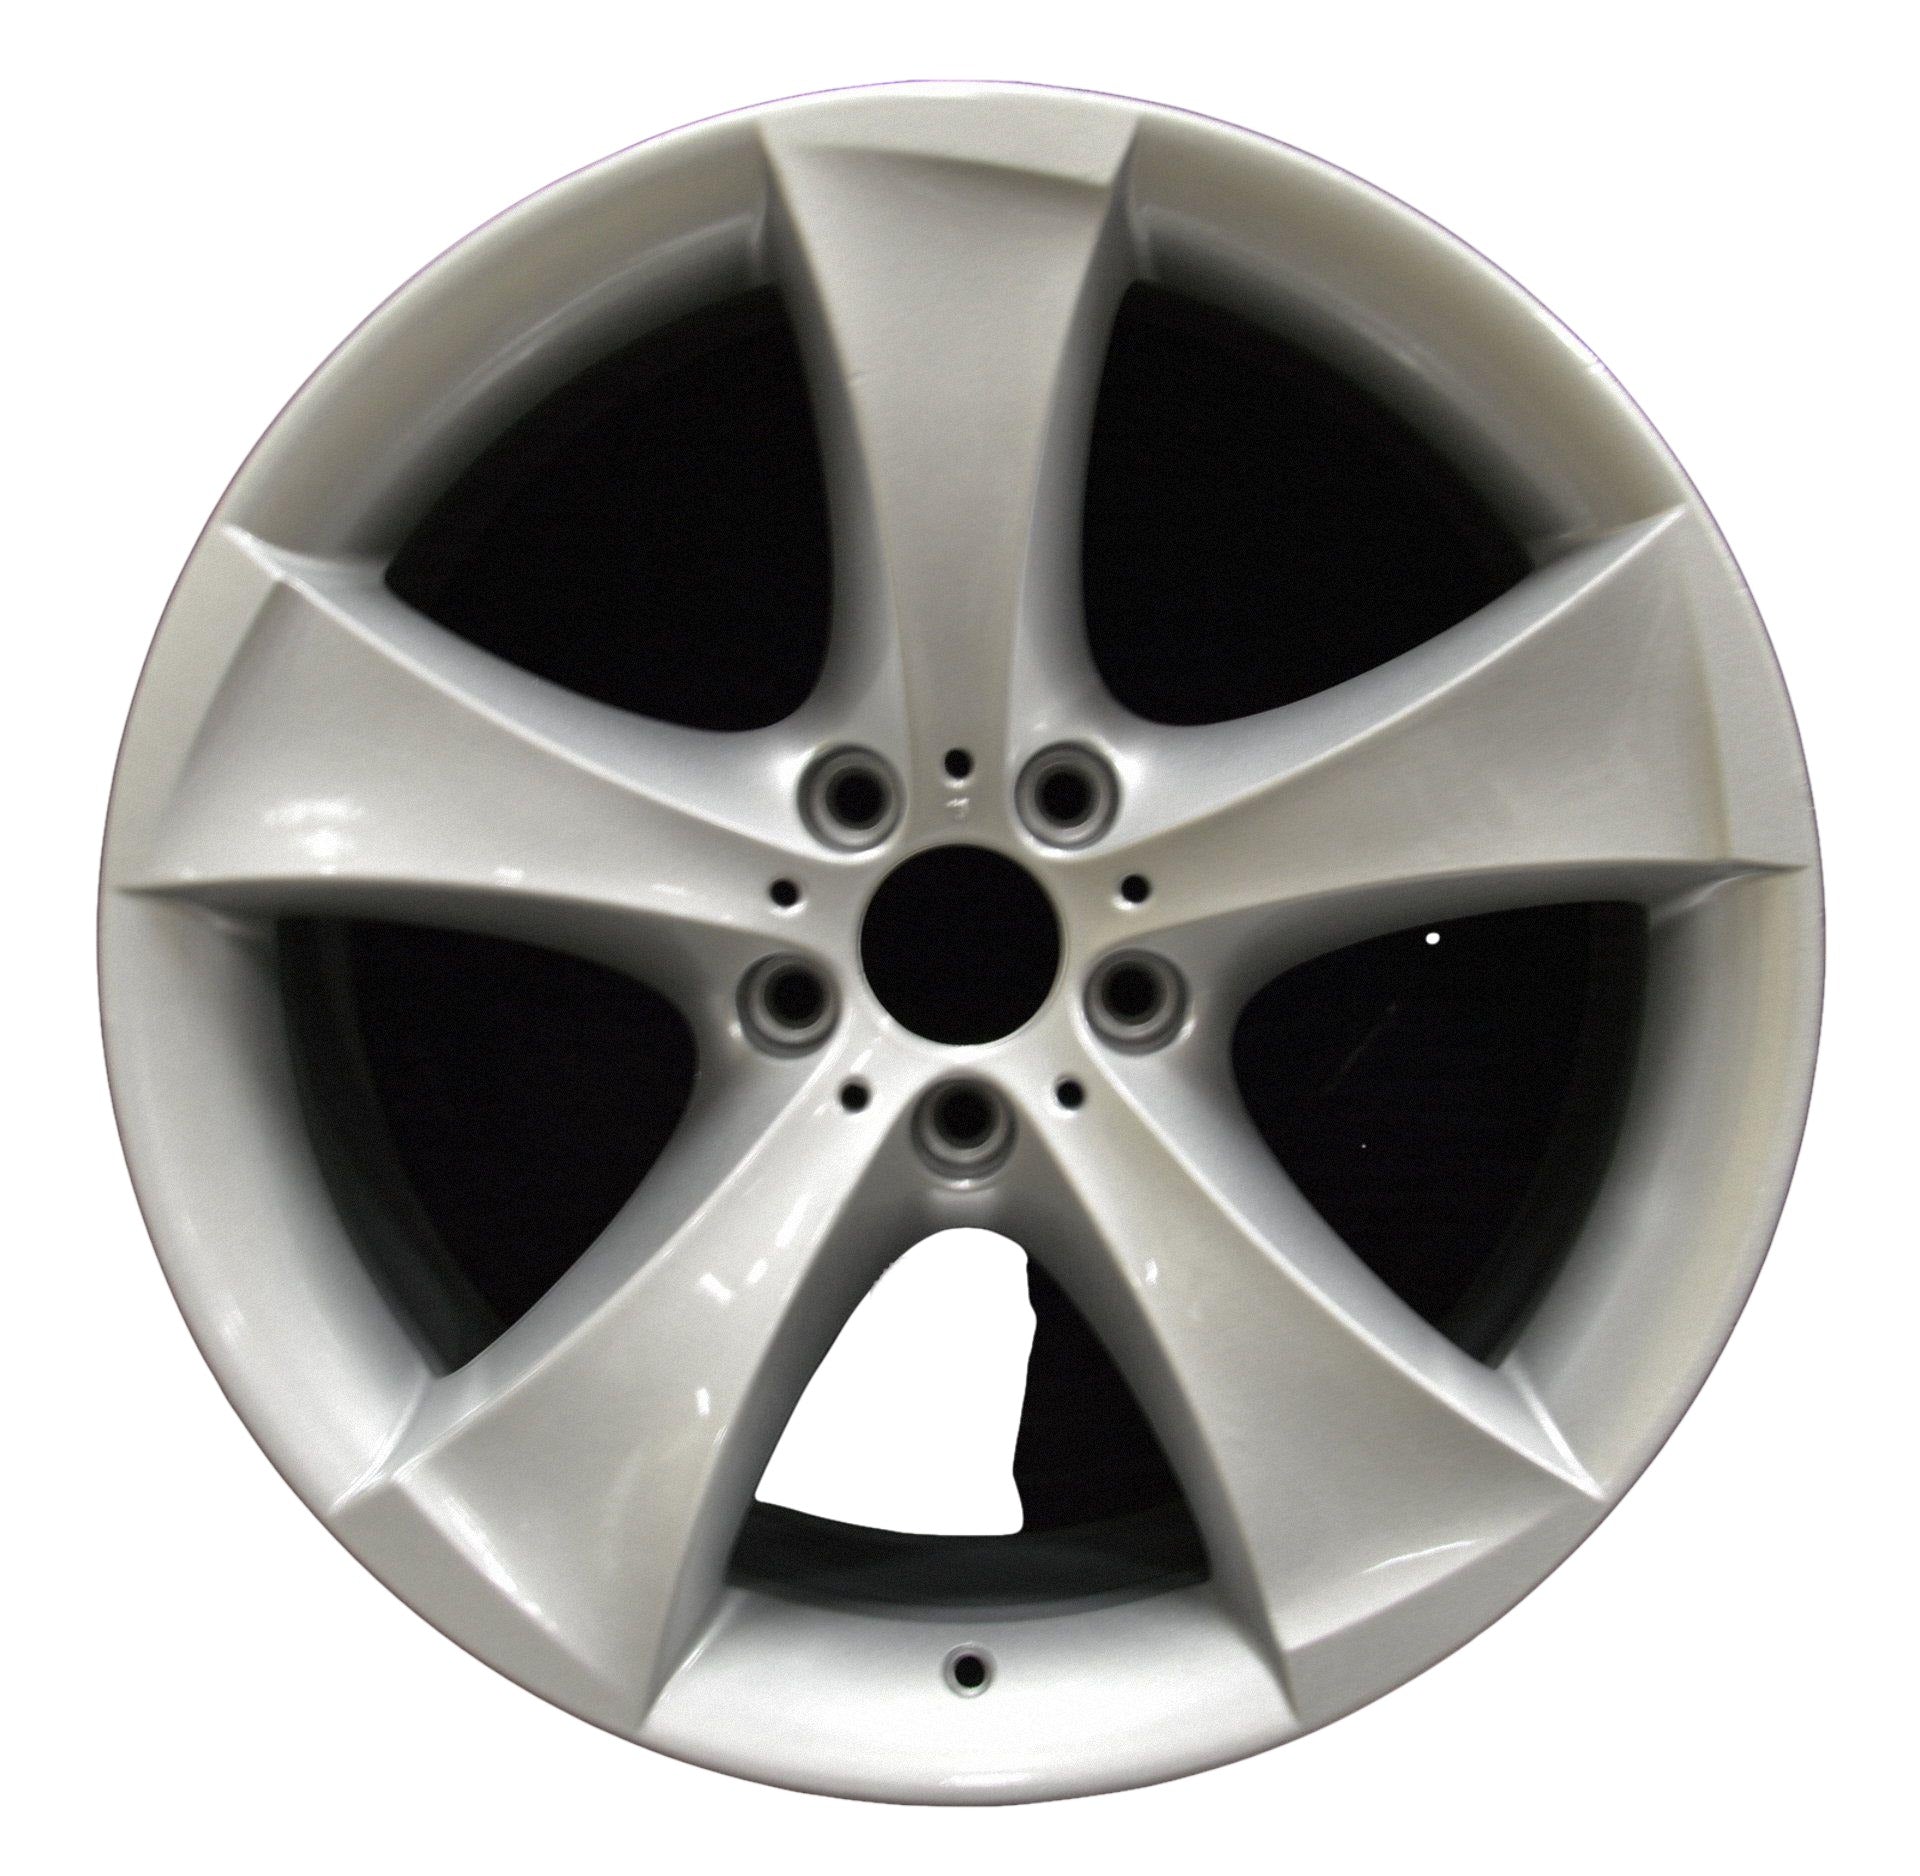 BMW X6M  2010, 2011, 2012, 2013, 2014 Factory OEM Car Wheel Size 20x10 Alloy WAO.71290FT.PS02.FF